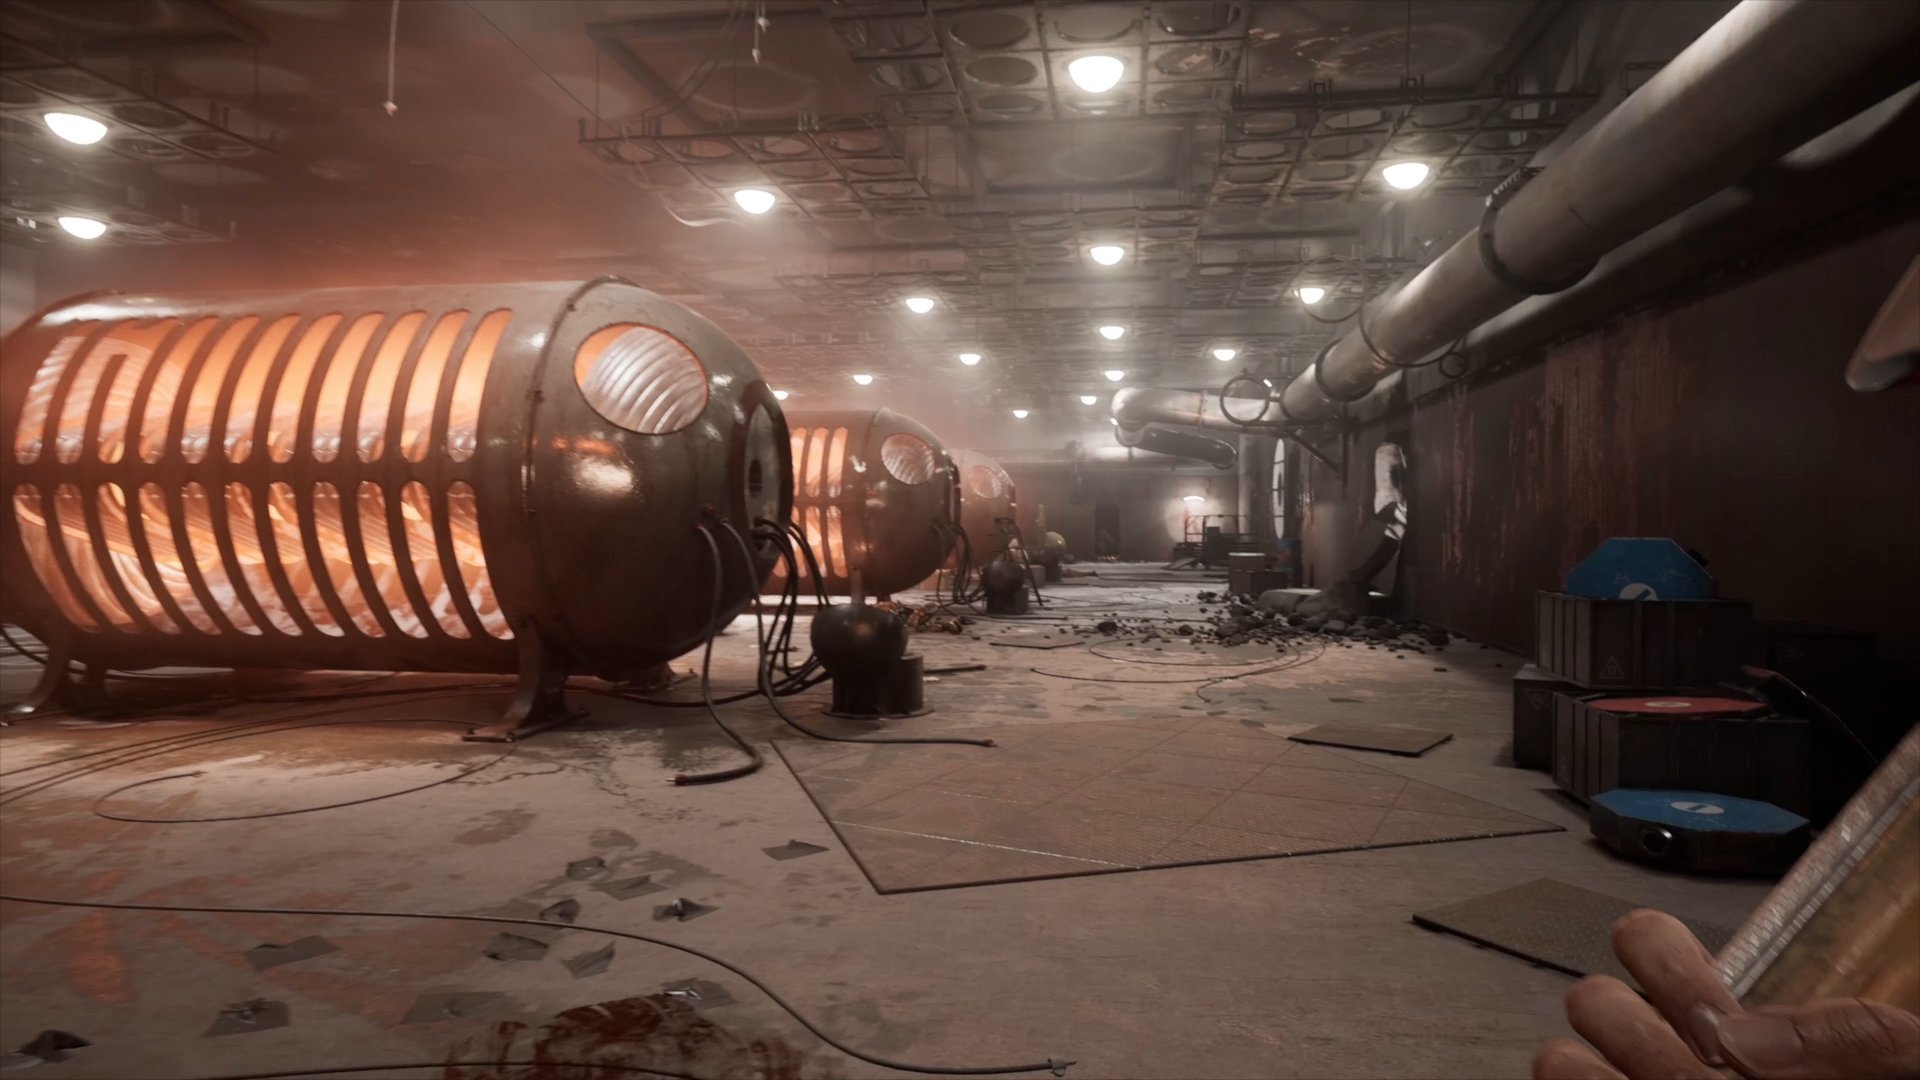 Atomic Heart DLC is Already in the Works